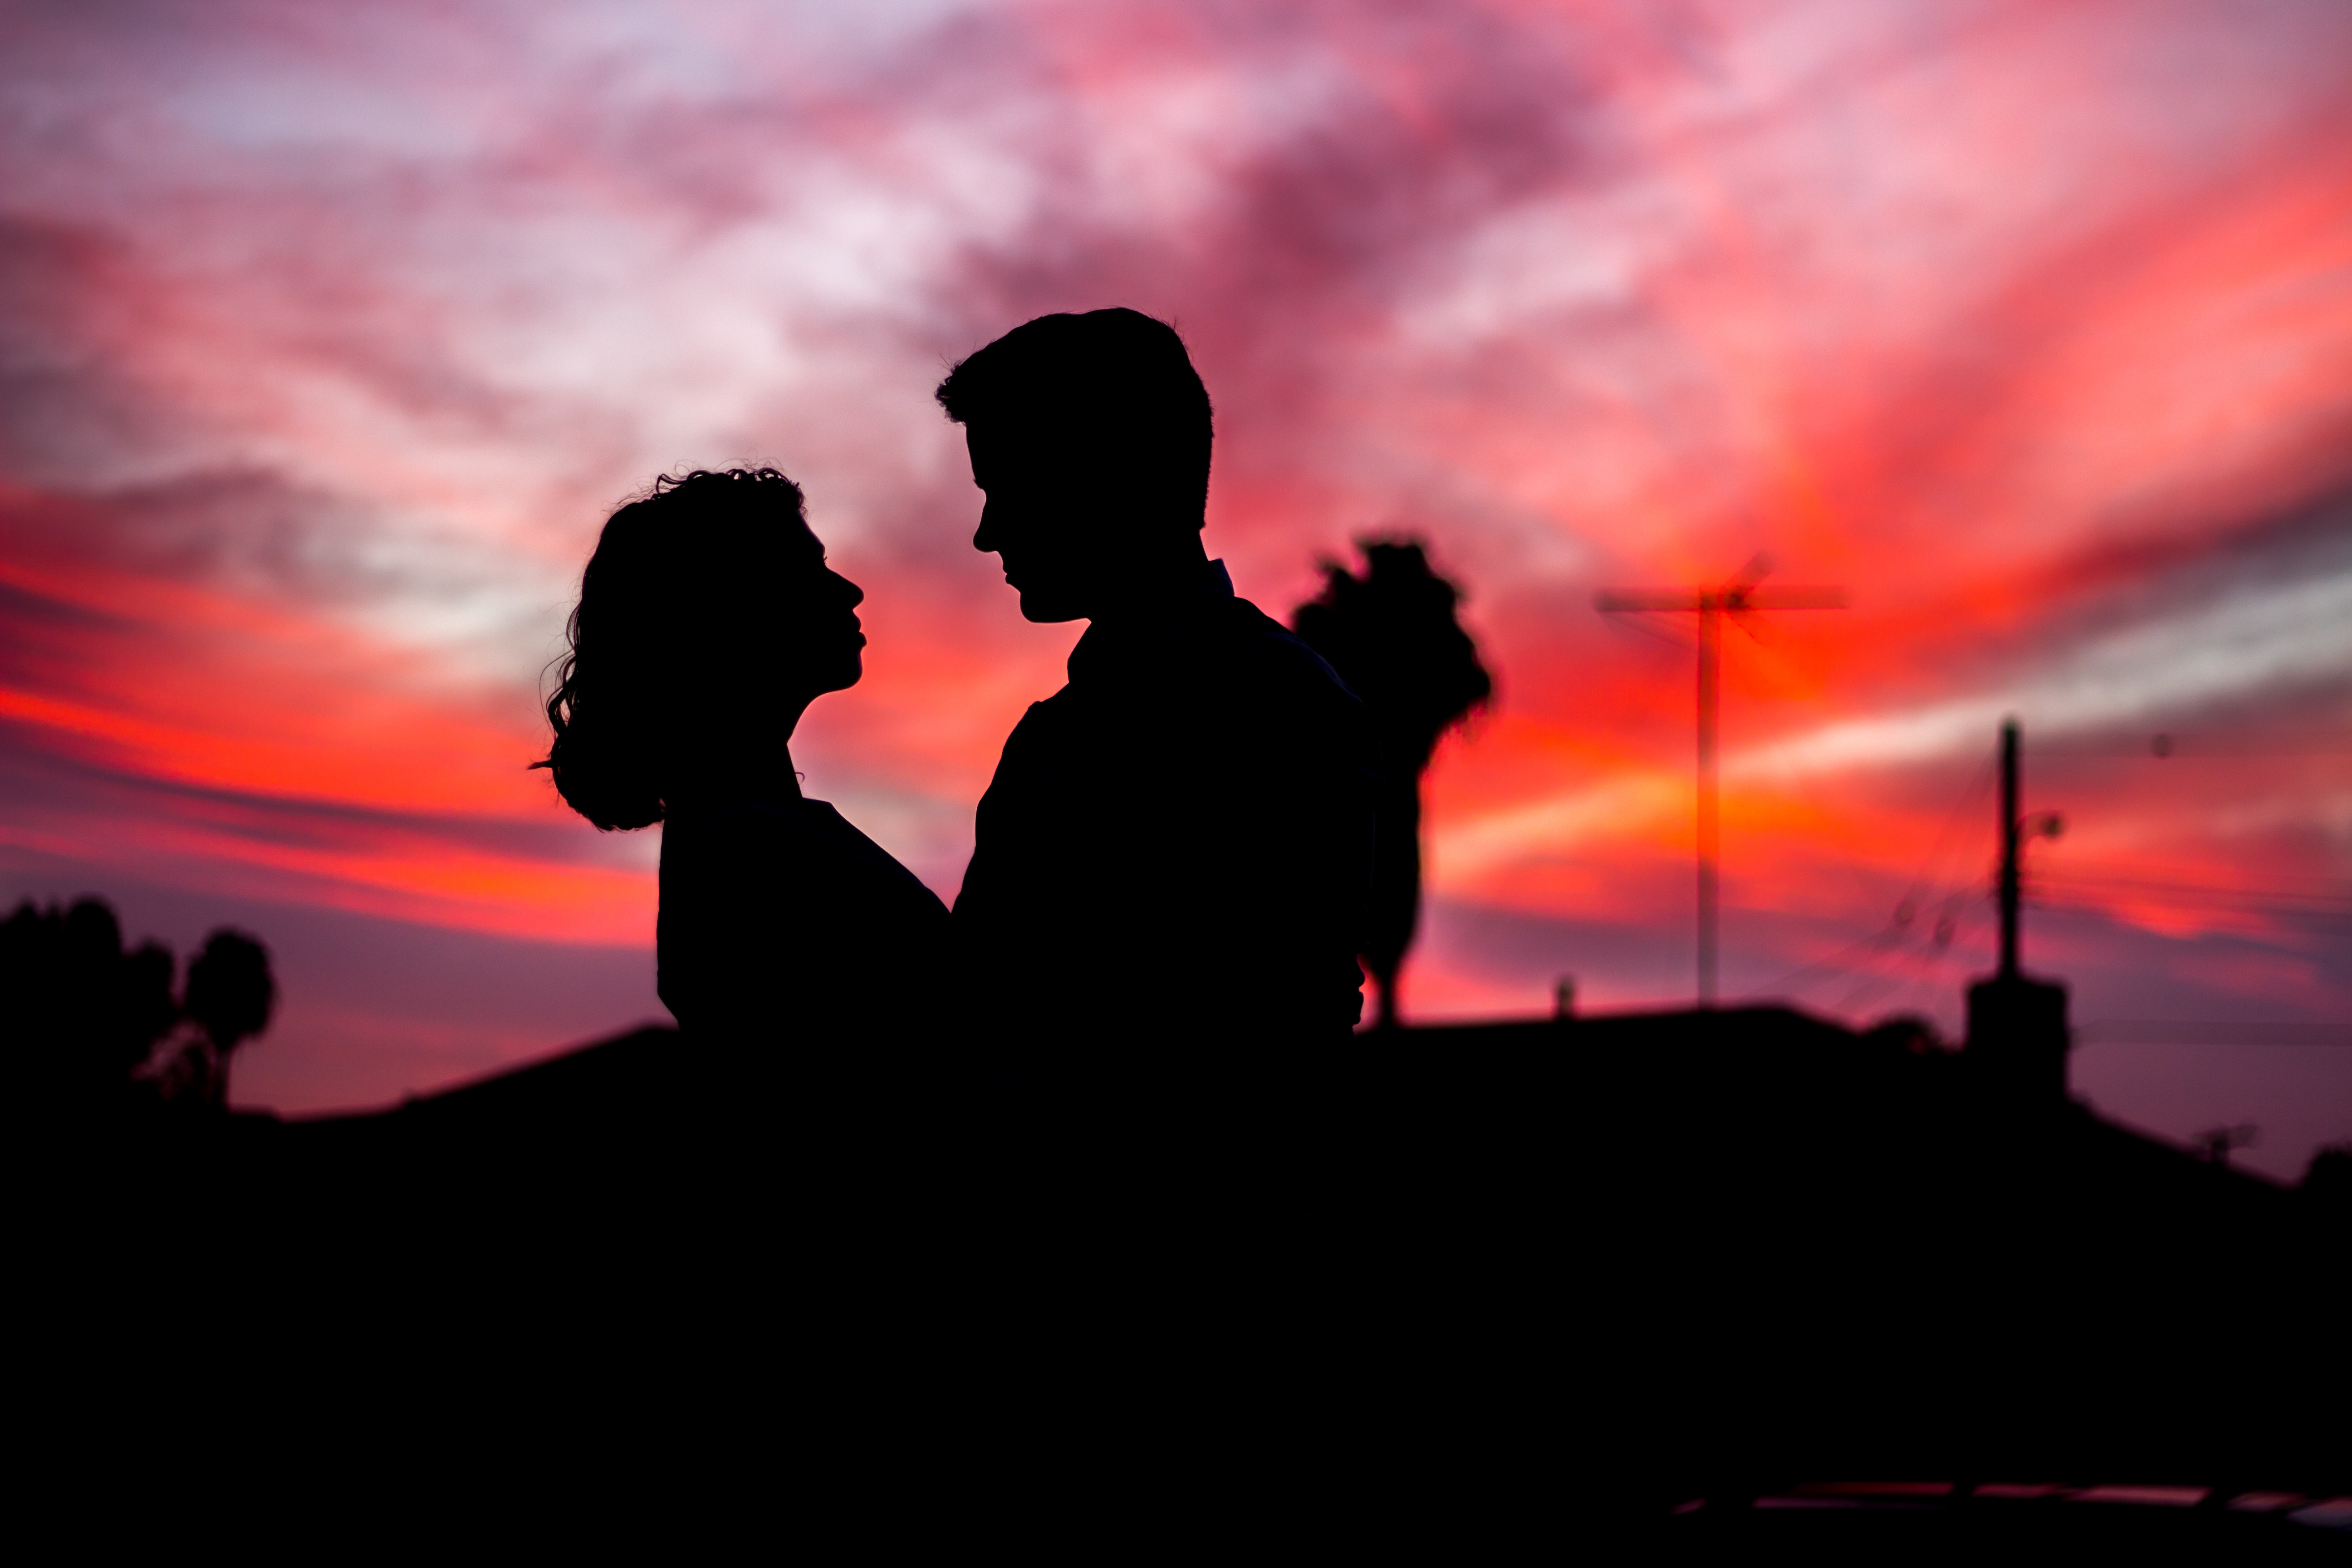 61812 download wallpaper romance, twilight, love, dark, couple, pair, silhouettes, dusk screensavers and pictures for free